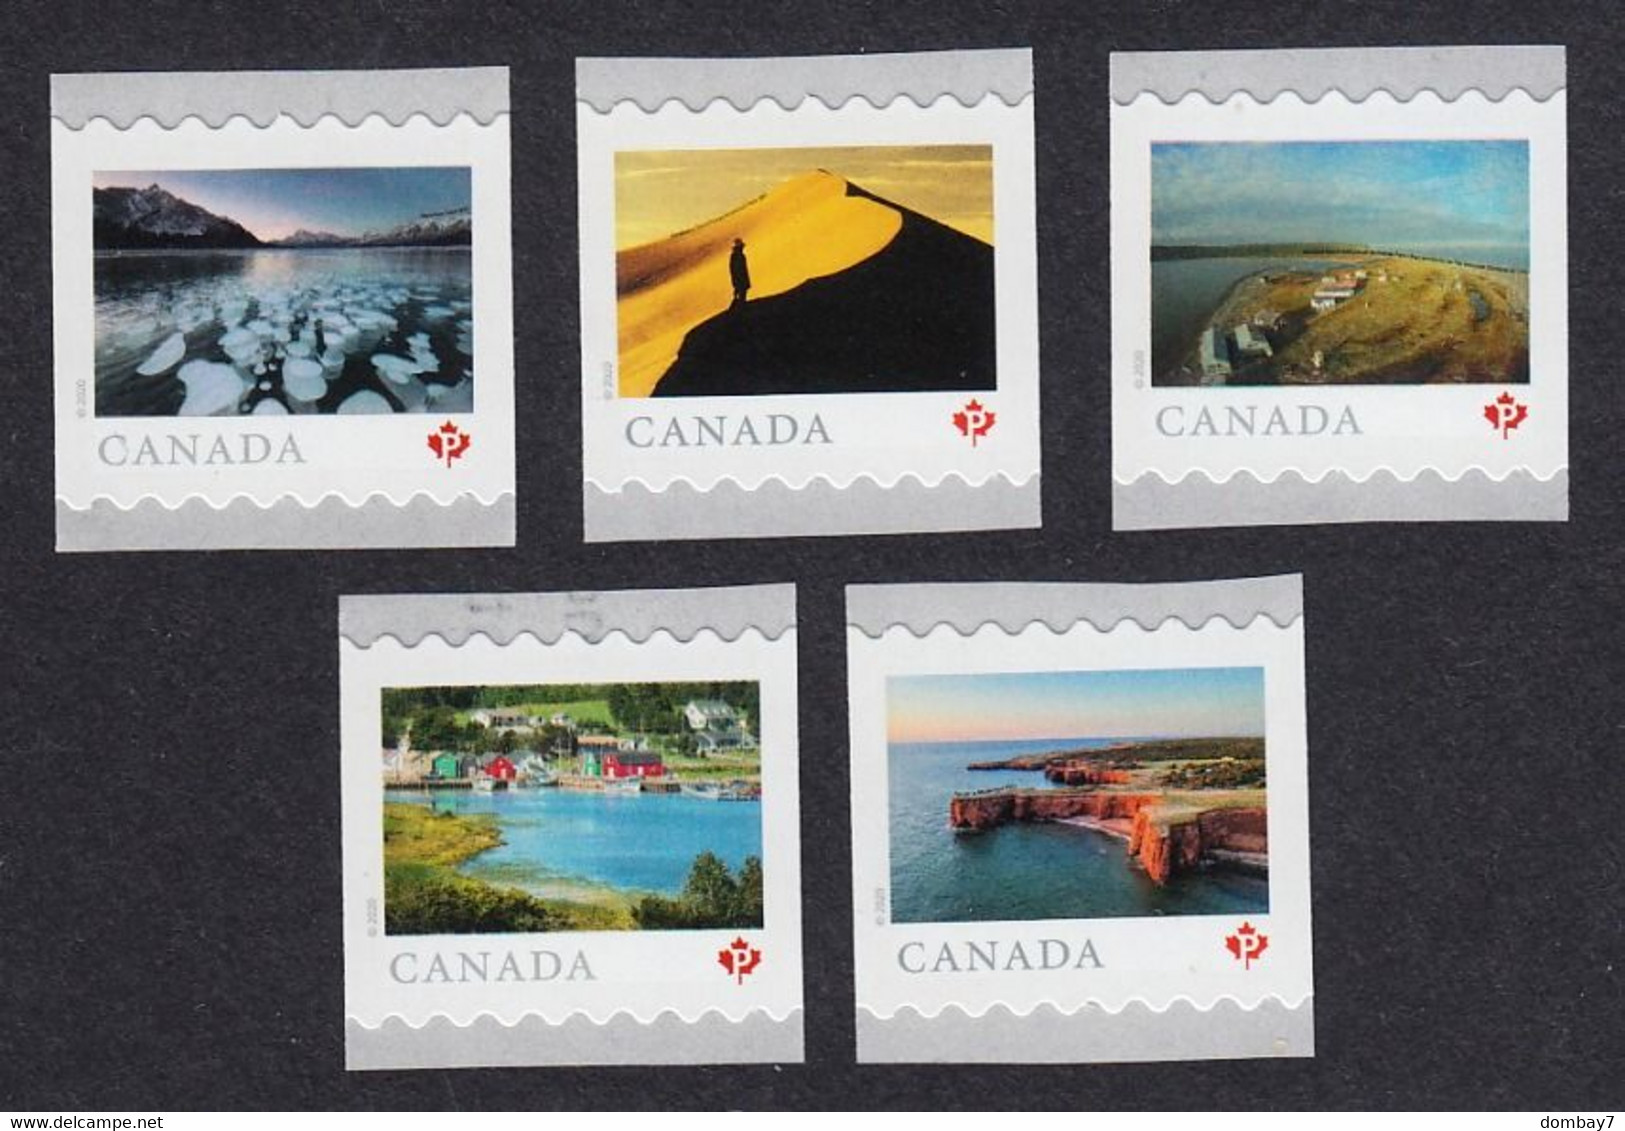 Qc. FROM FAR AND WIDE = Full Set Of 5 Stamps Cut From COIL / ROLL = MNH Canada 2020 Sc #3212-3216 - Neufs